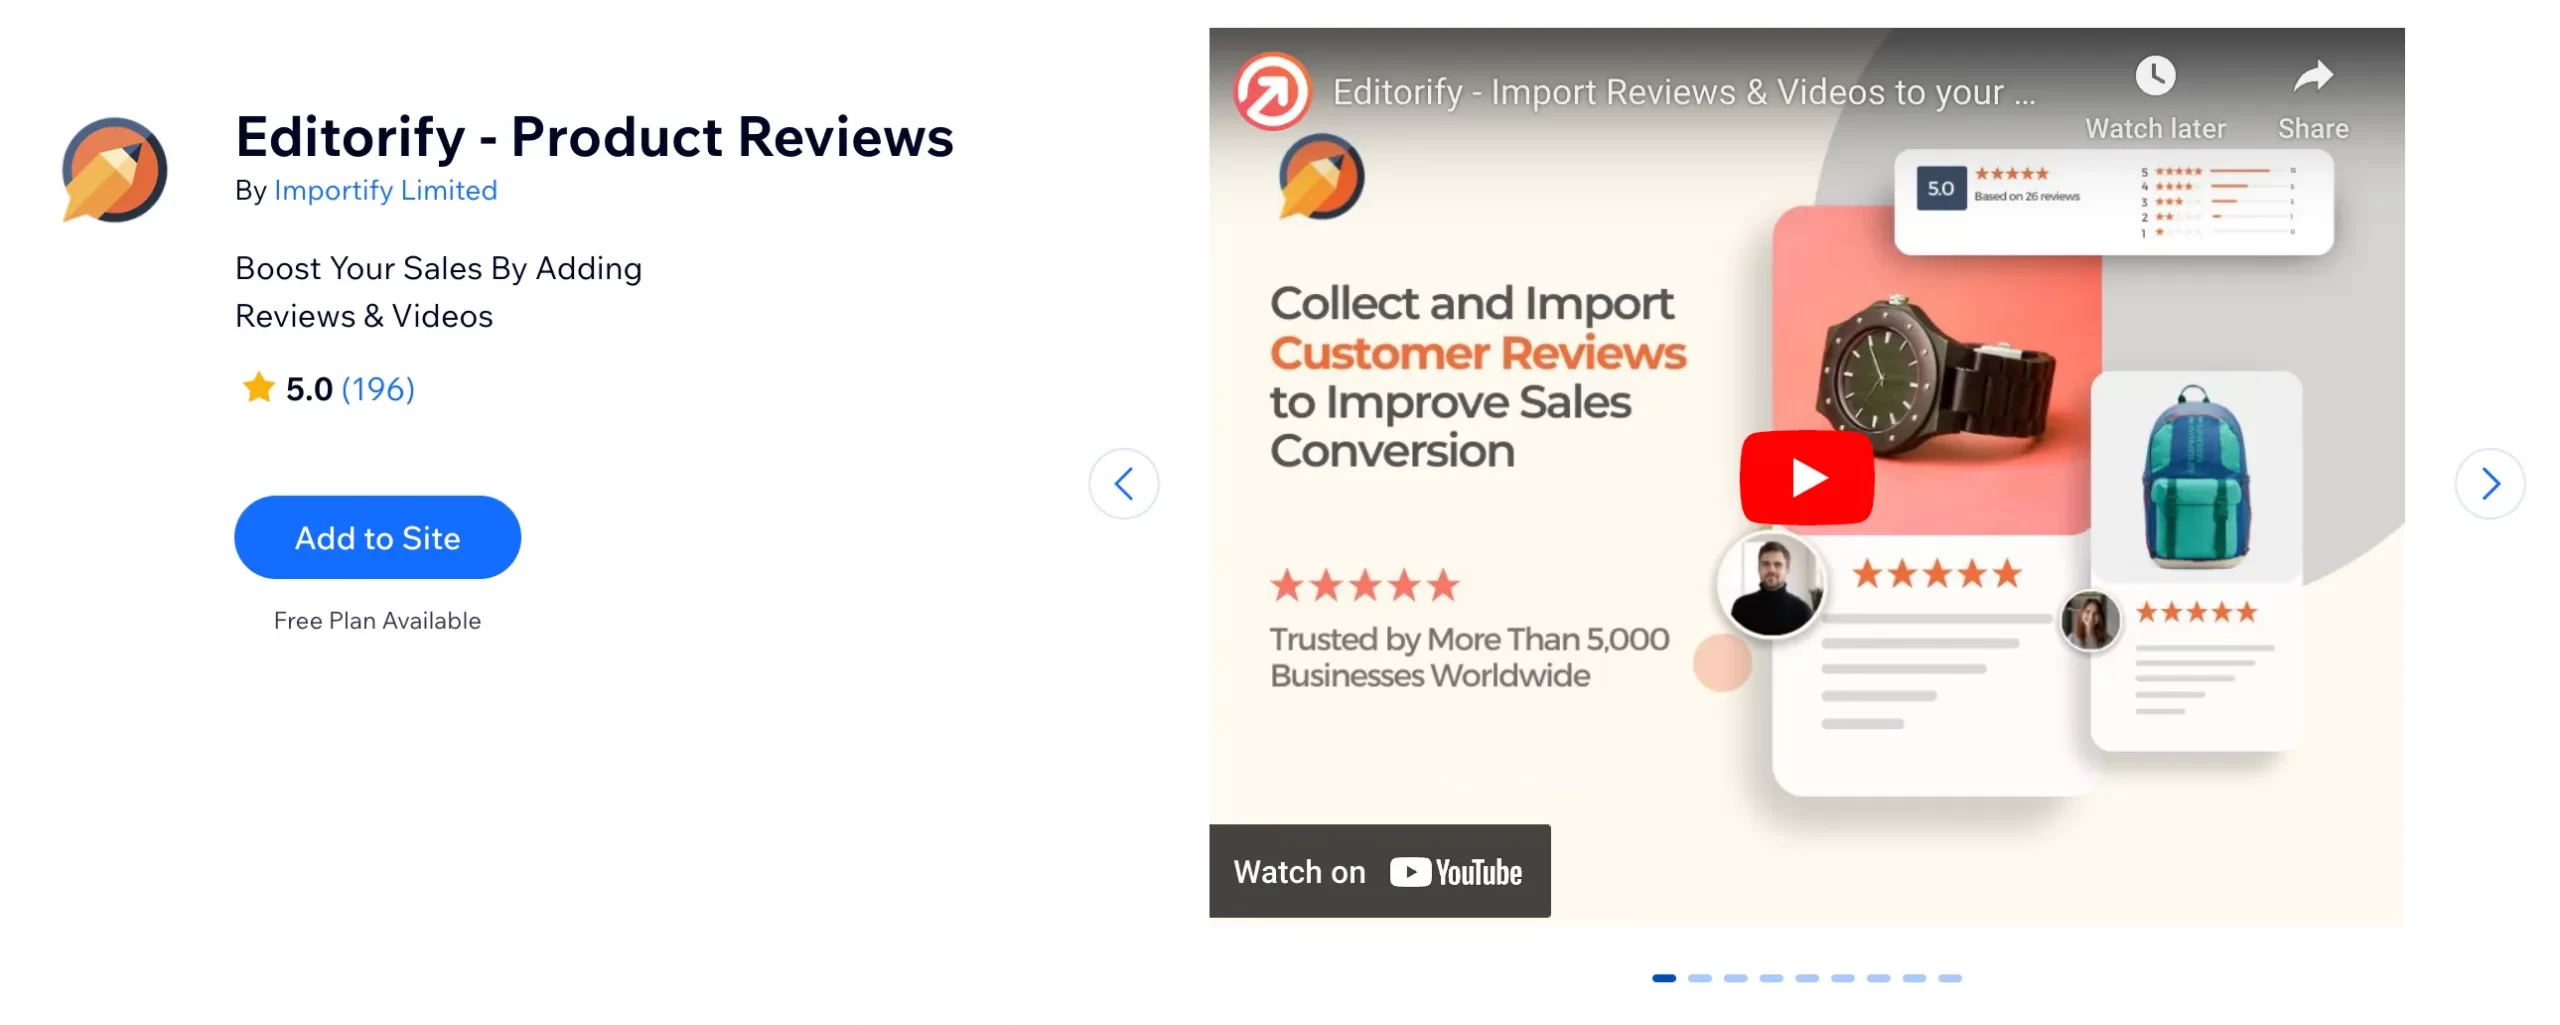 Editorify - Product Reviews best apps for sales & conversions